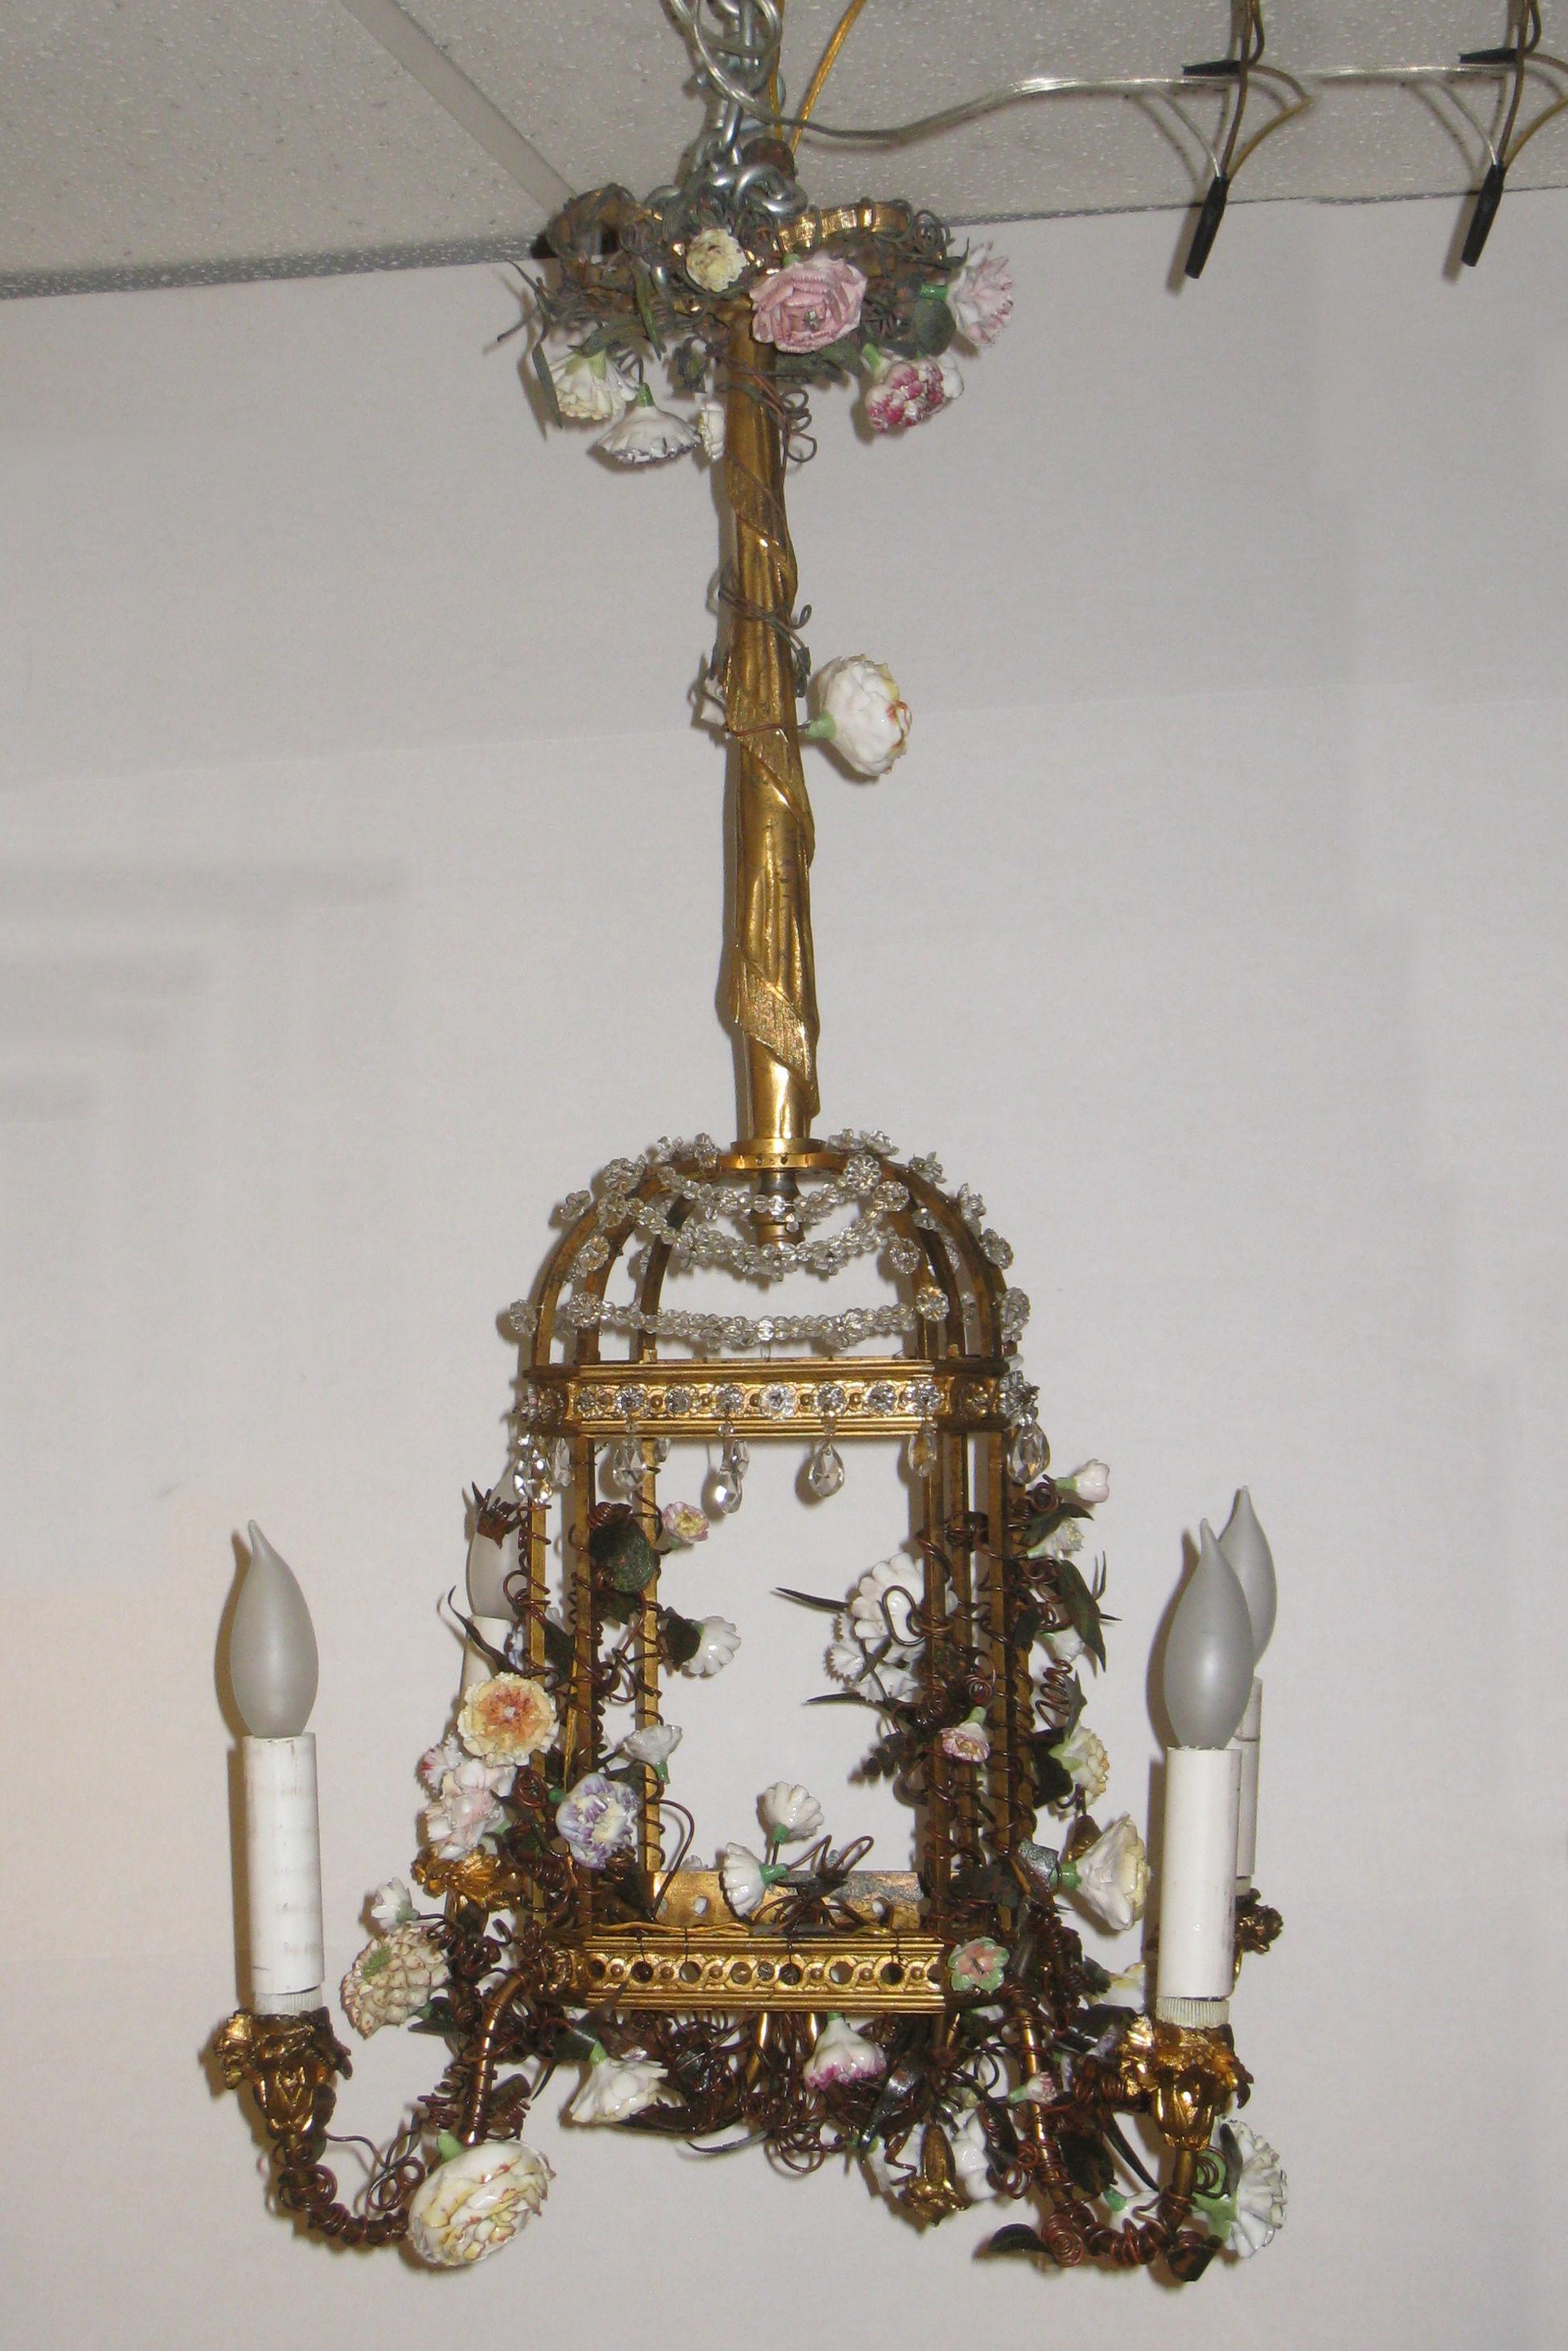 Finest French Louis XVI style 19th century bird cage form gilt bronze, tole, and crystal chandelier with applied porcelain flowers.